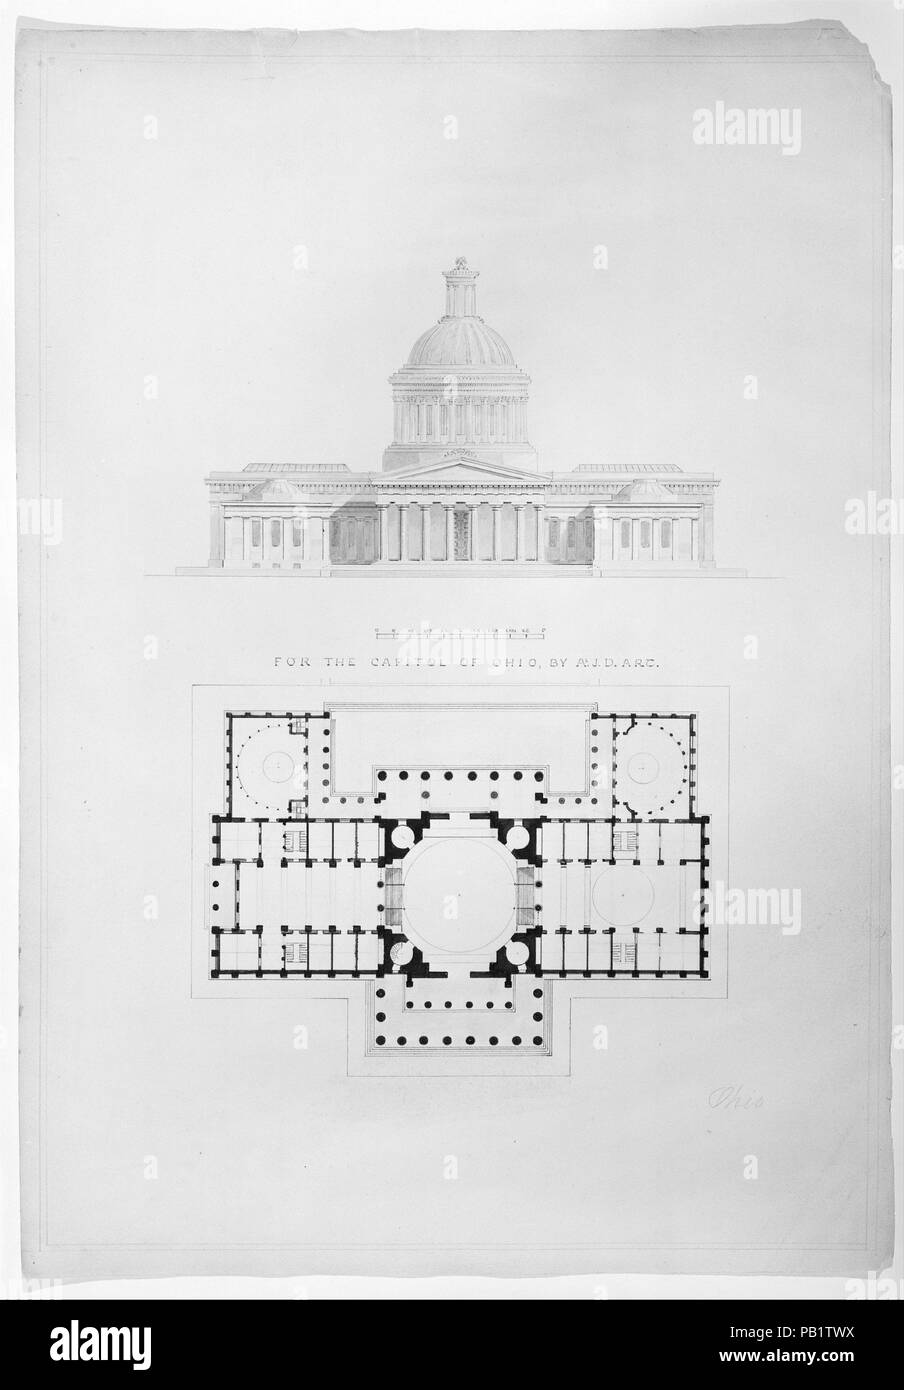 For the Capitol of Ohio, by A.J.D. arch. Artist: Alexander Jackson Davis (American, New York 1803-1892 West Orange, New Jersey). Dimensions: sheet: 20 11/16 x 14 1/2 in. (52.6 x 36.8 cm). Date: ca. 1839. Museum: Metropolitan Museum of Art, New York, USA. Stock Photo